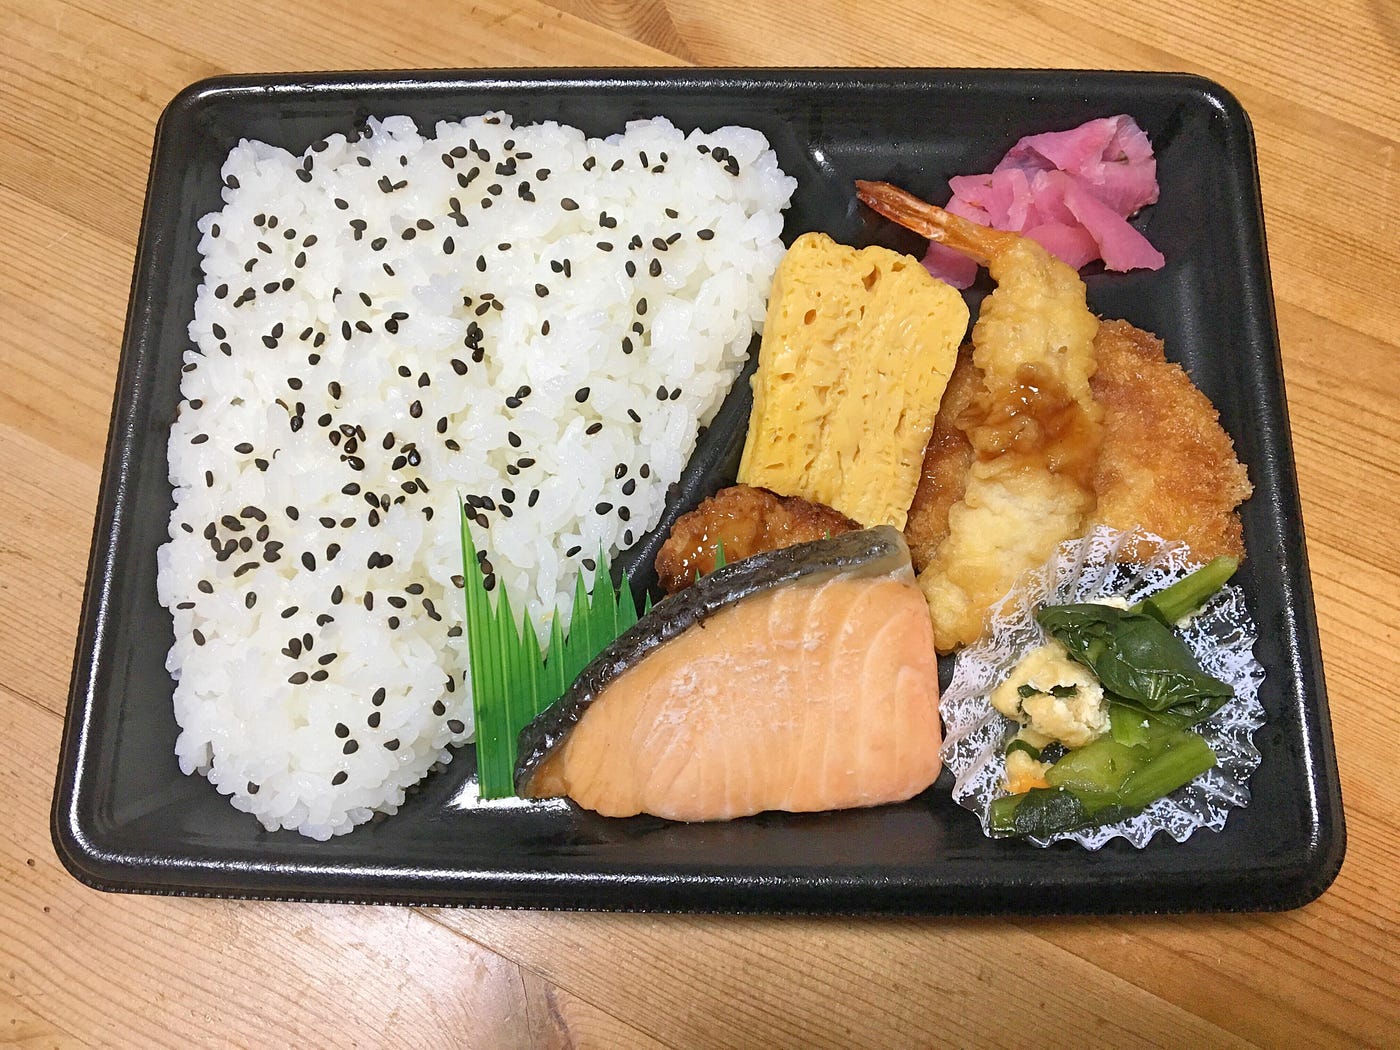 Japanese Bento Boxes That Prioritize Artistic Value Over Taste